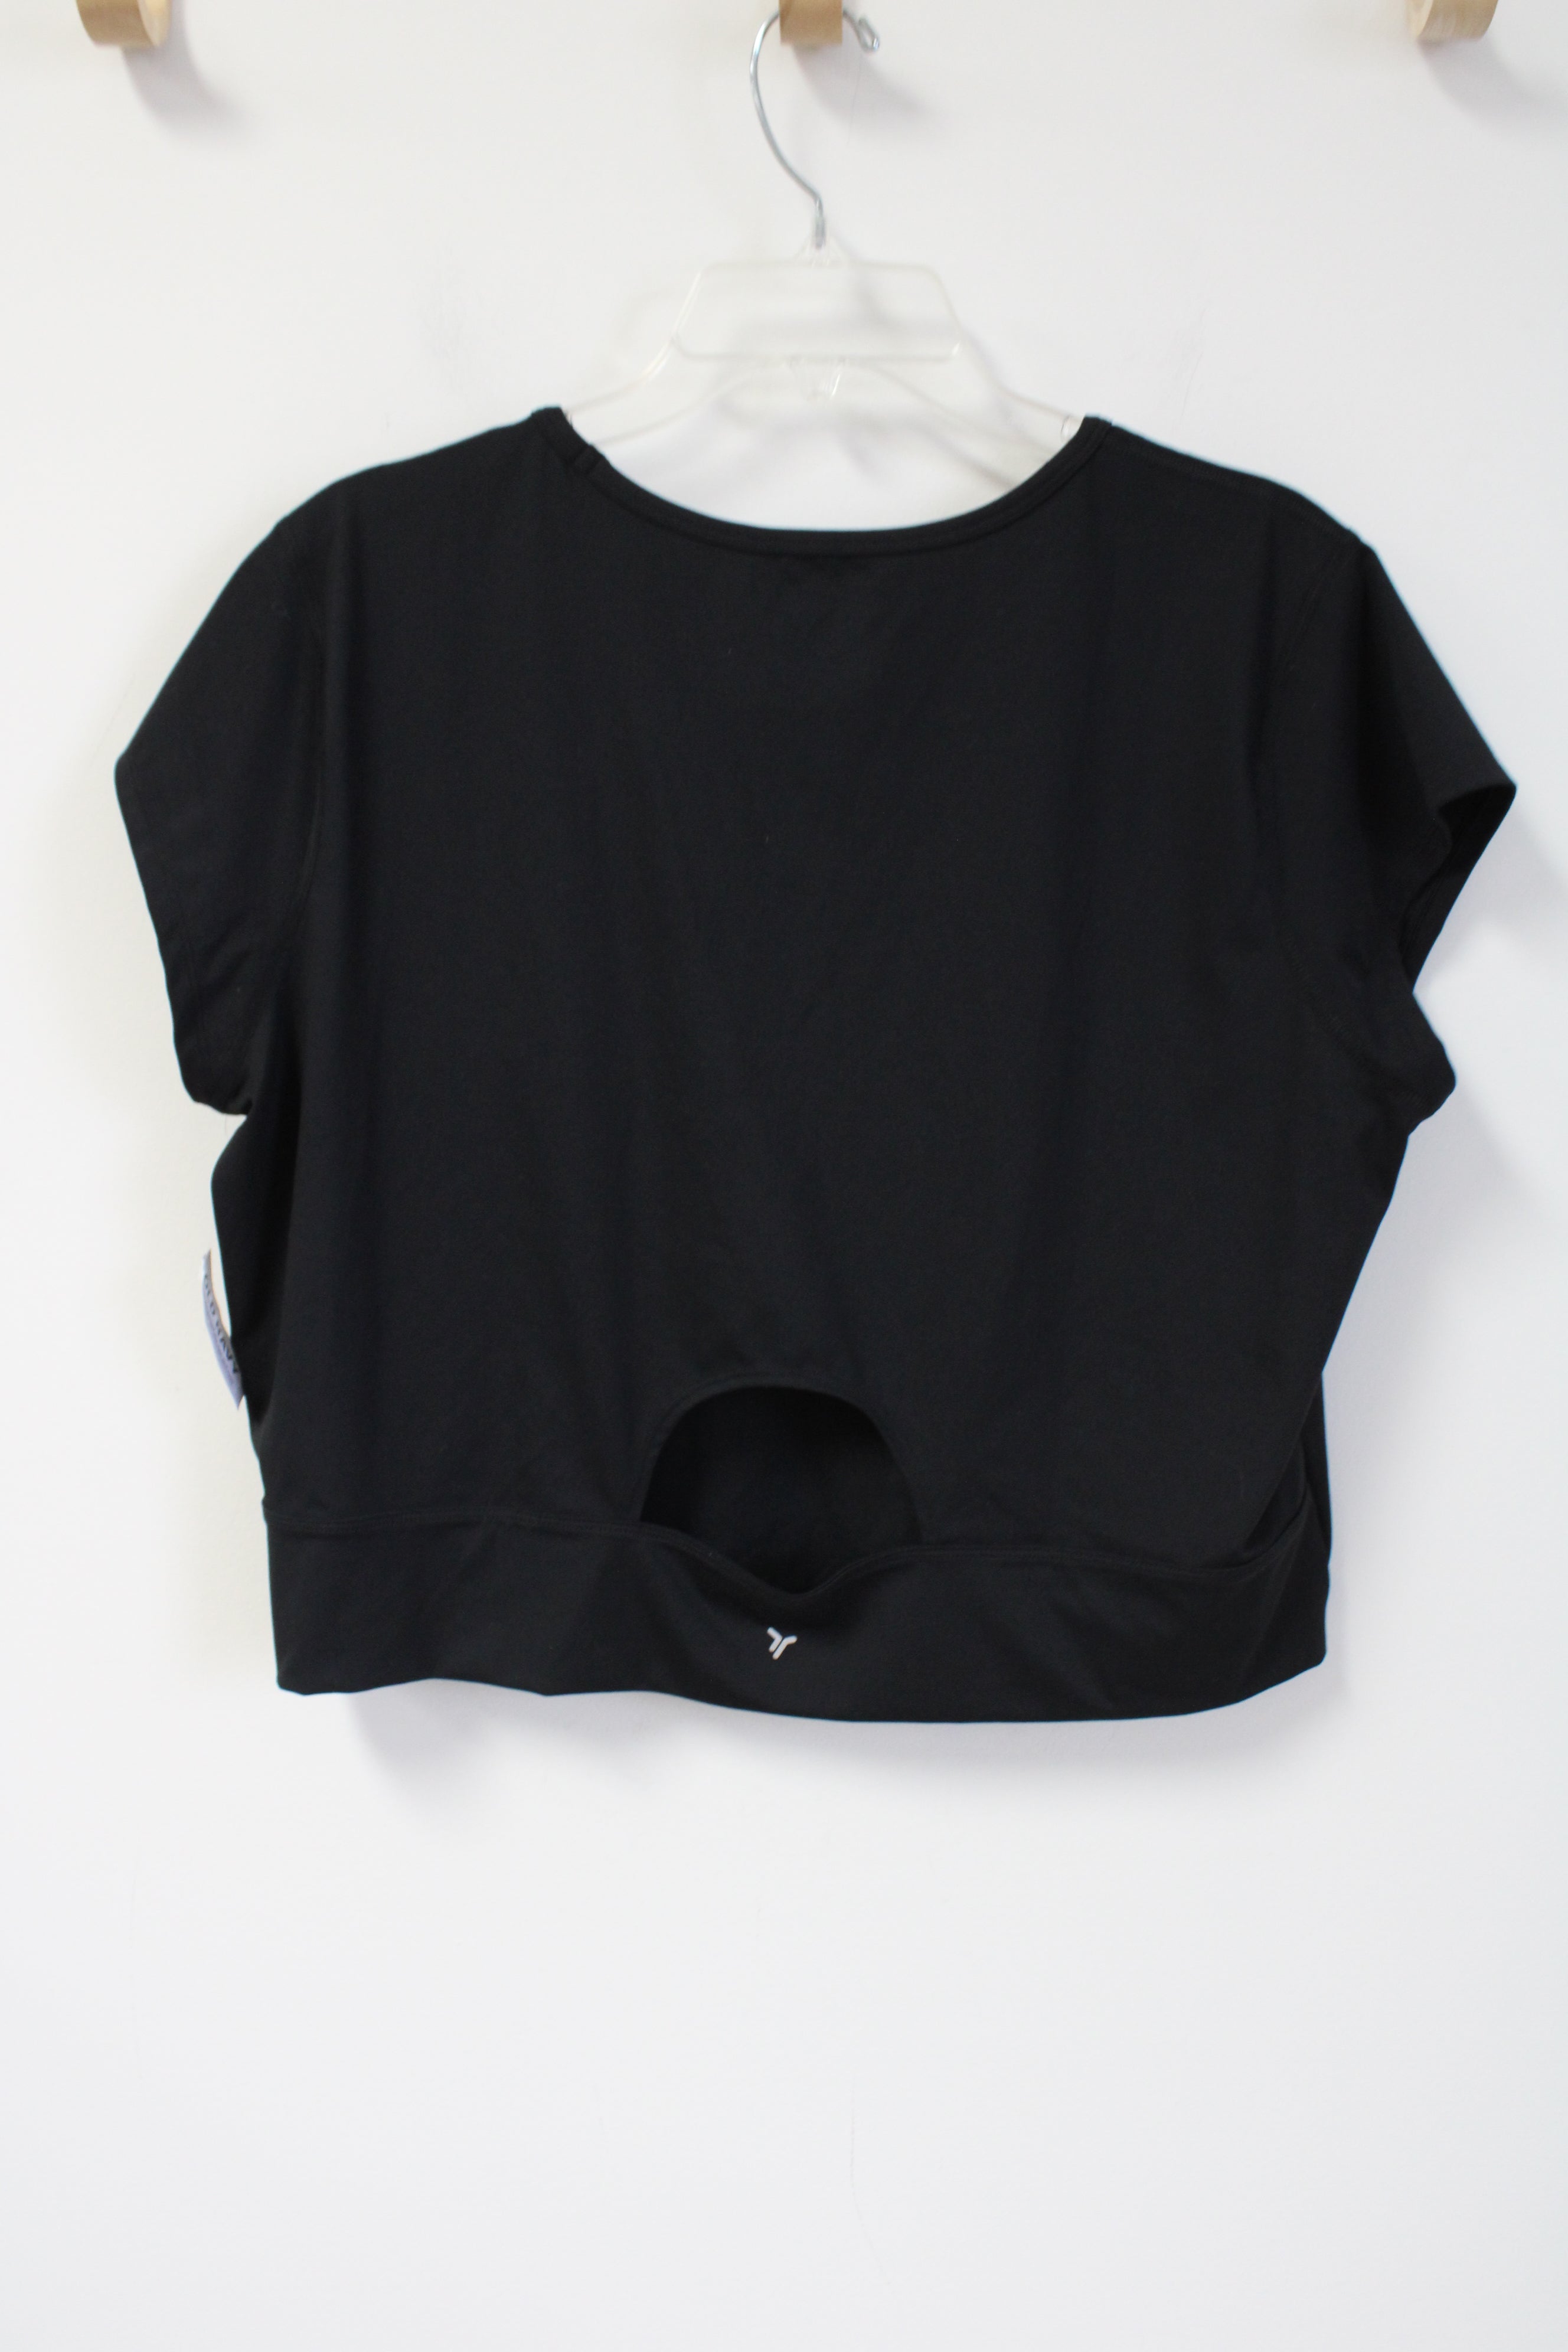 NEW Old Navy Active Powersoft Black Crop Tee | XL Tall